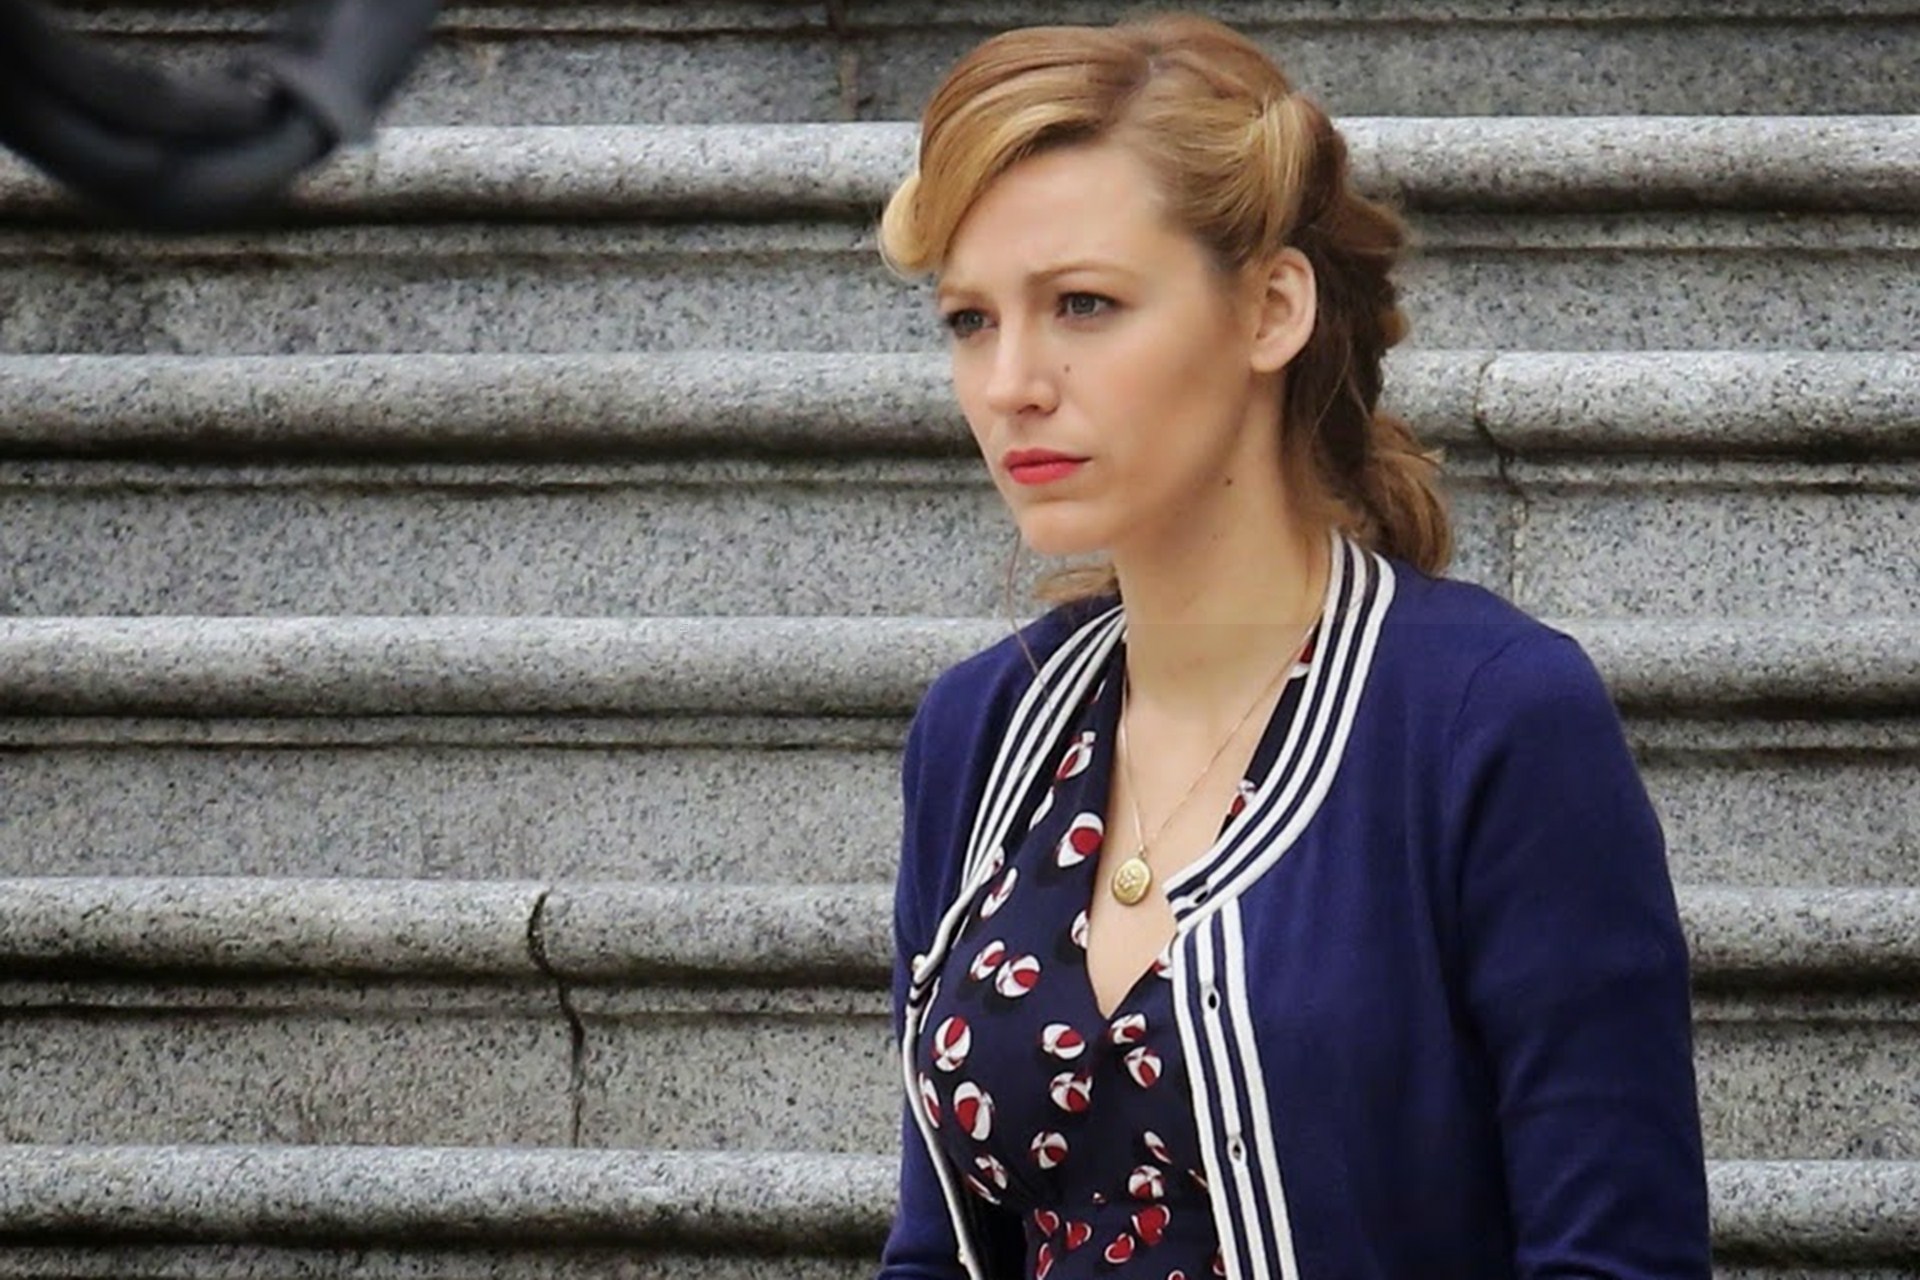 The Age Of Adaline #21